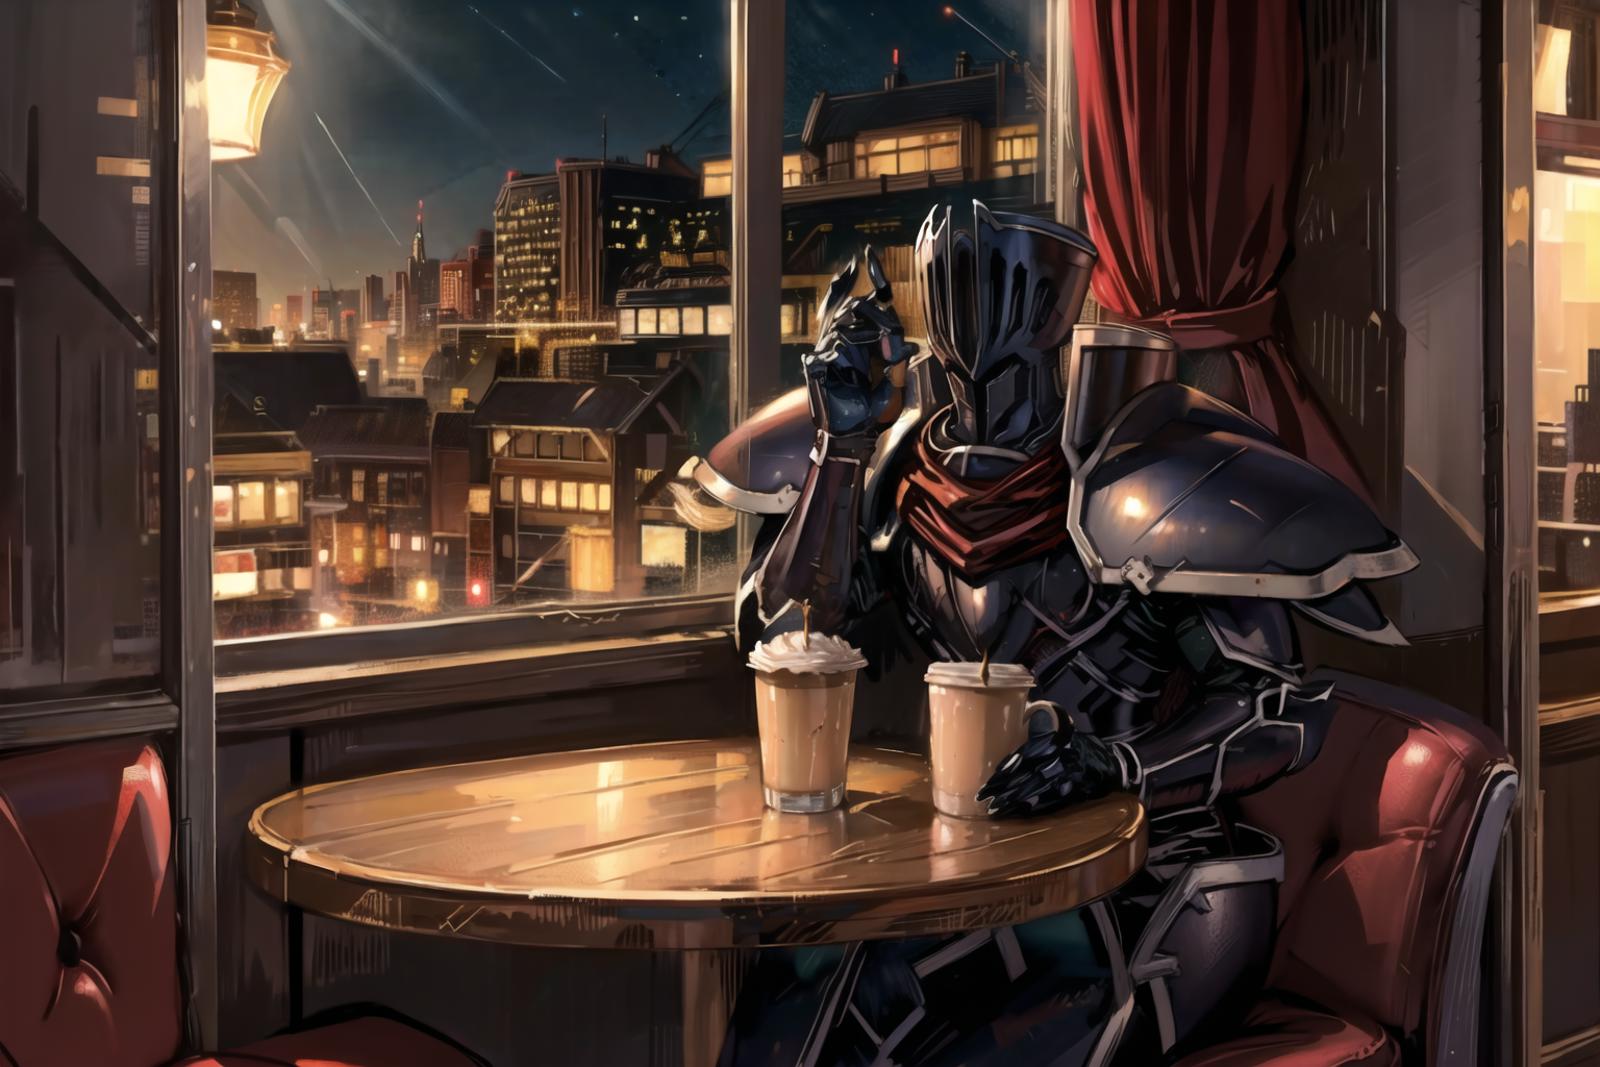 The Black Knight - Fire Emblem image by Fenchurch